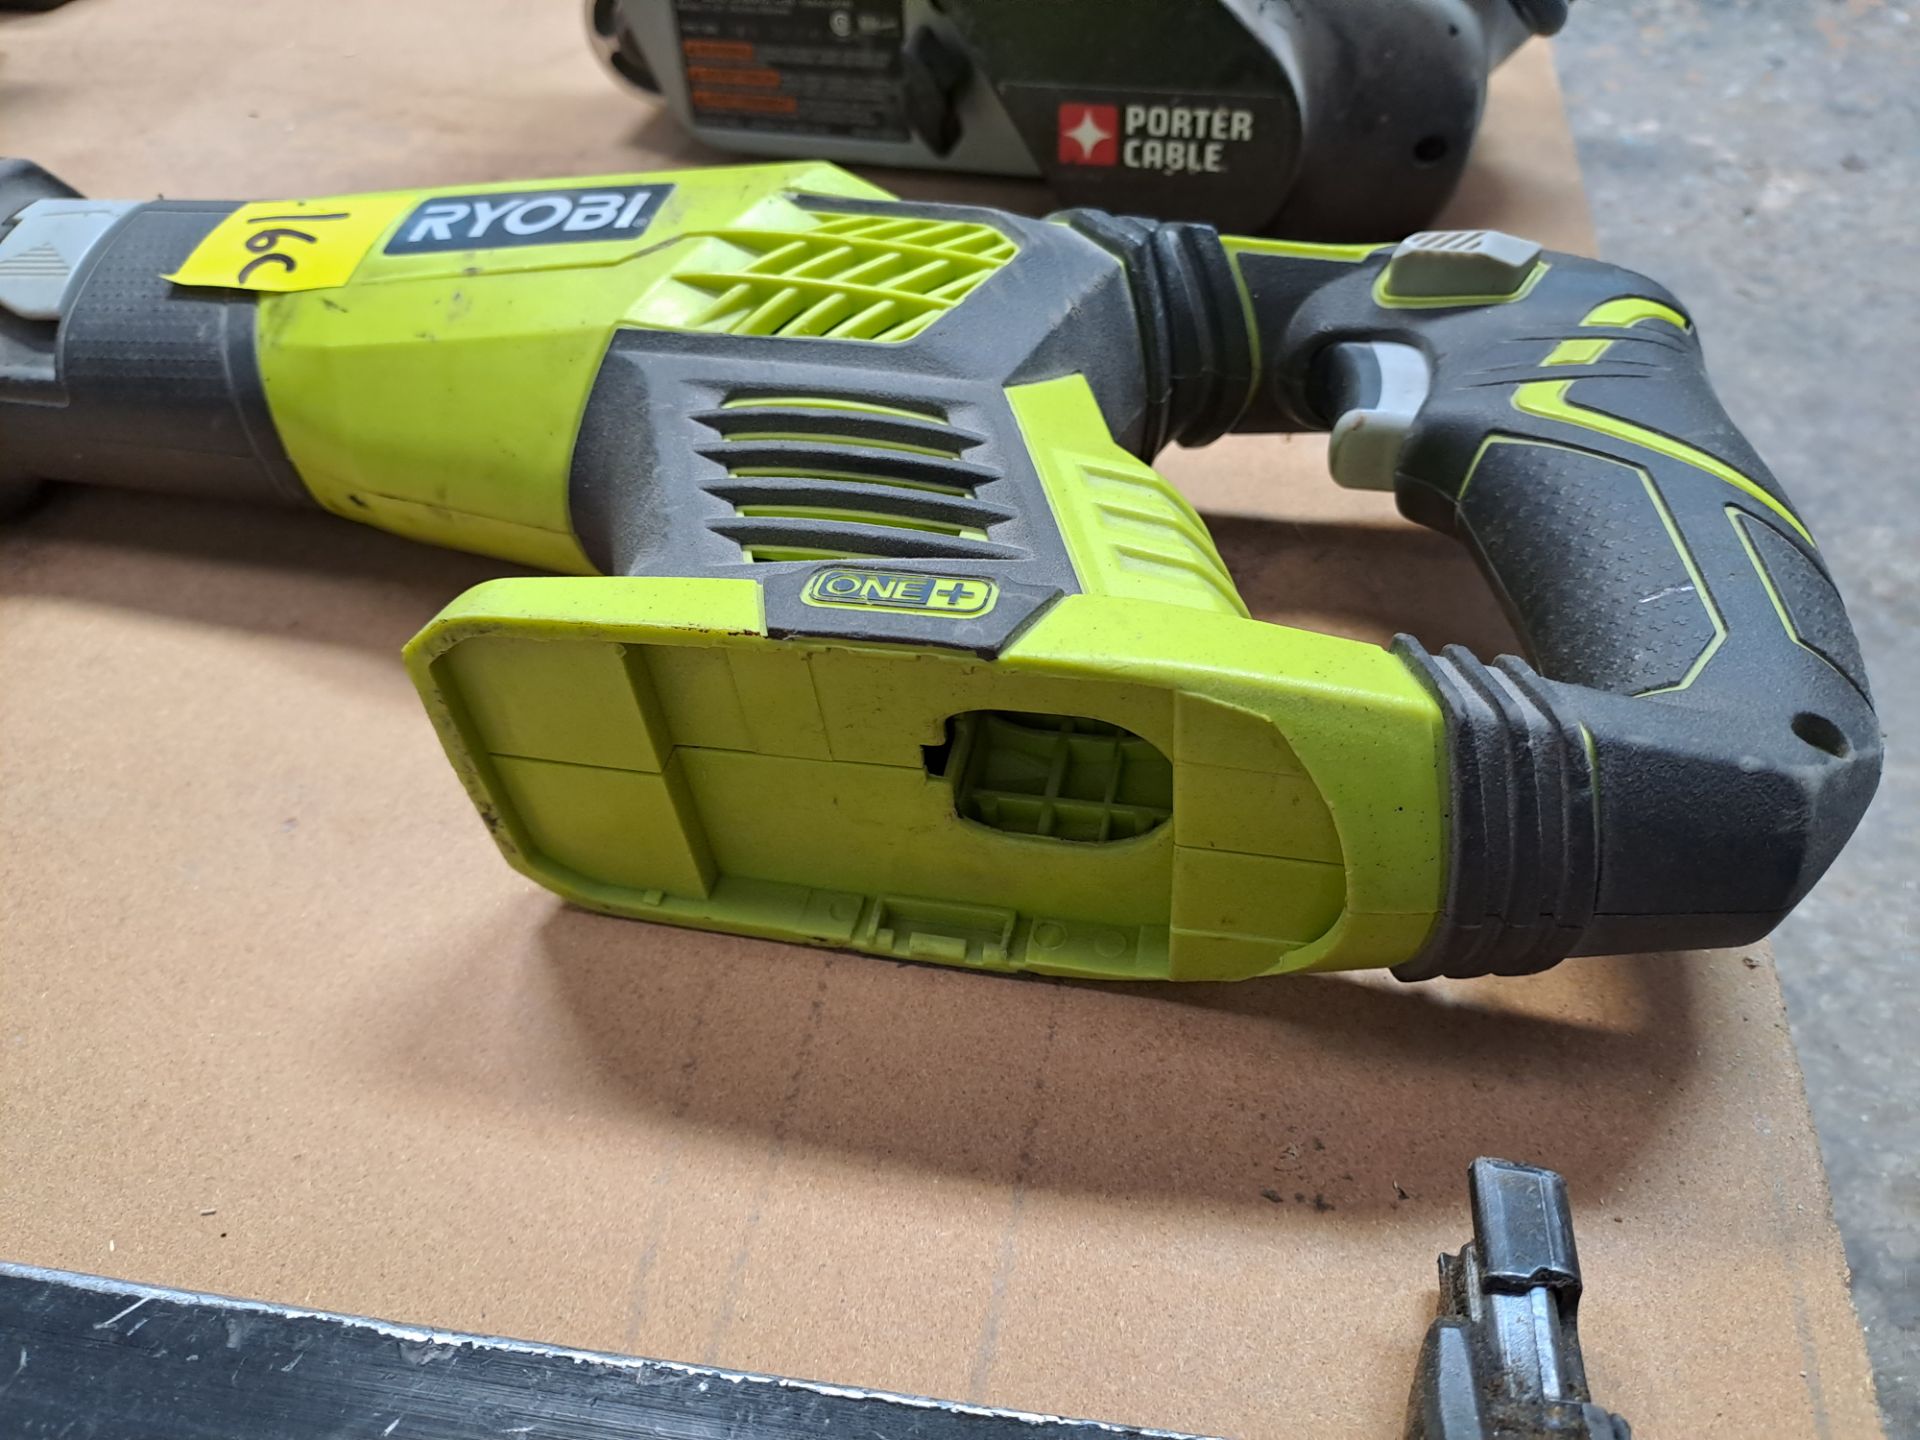 Lot of 4 pieces contains: 1 Porter electric sander with dust collector; 1 Ryobi wood saw without ba - Image 13 of 14